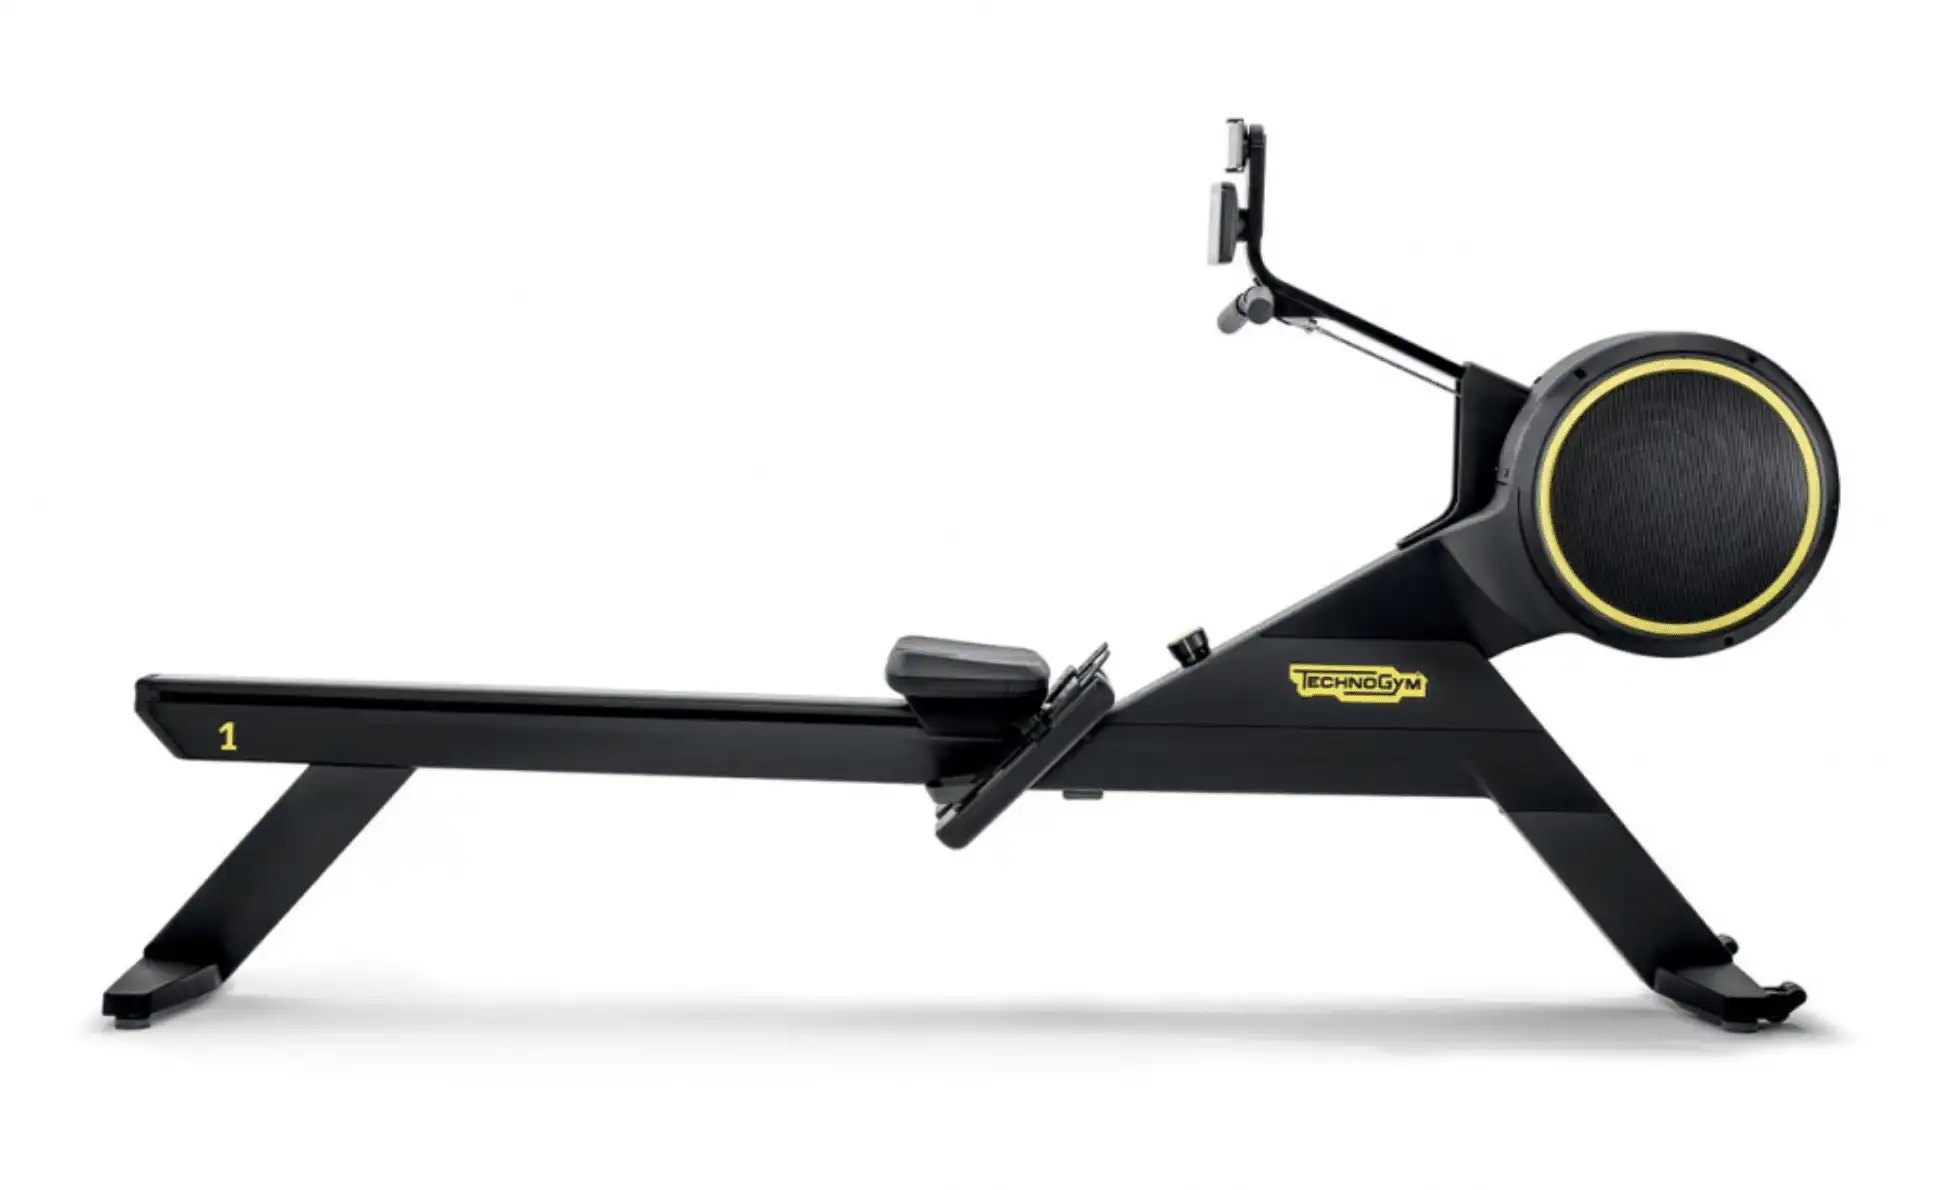 Skillrow: the Rowing Machine for Home